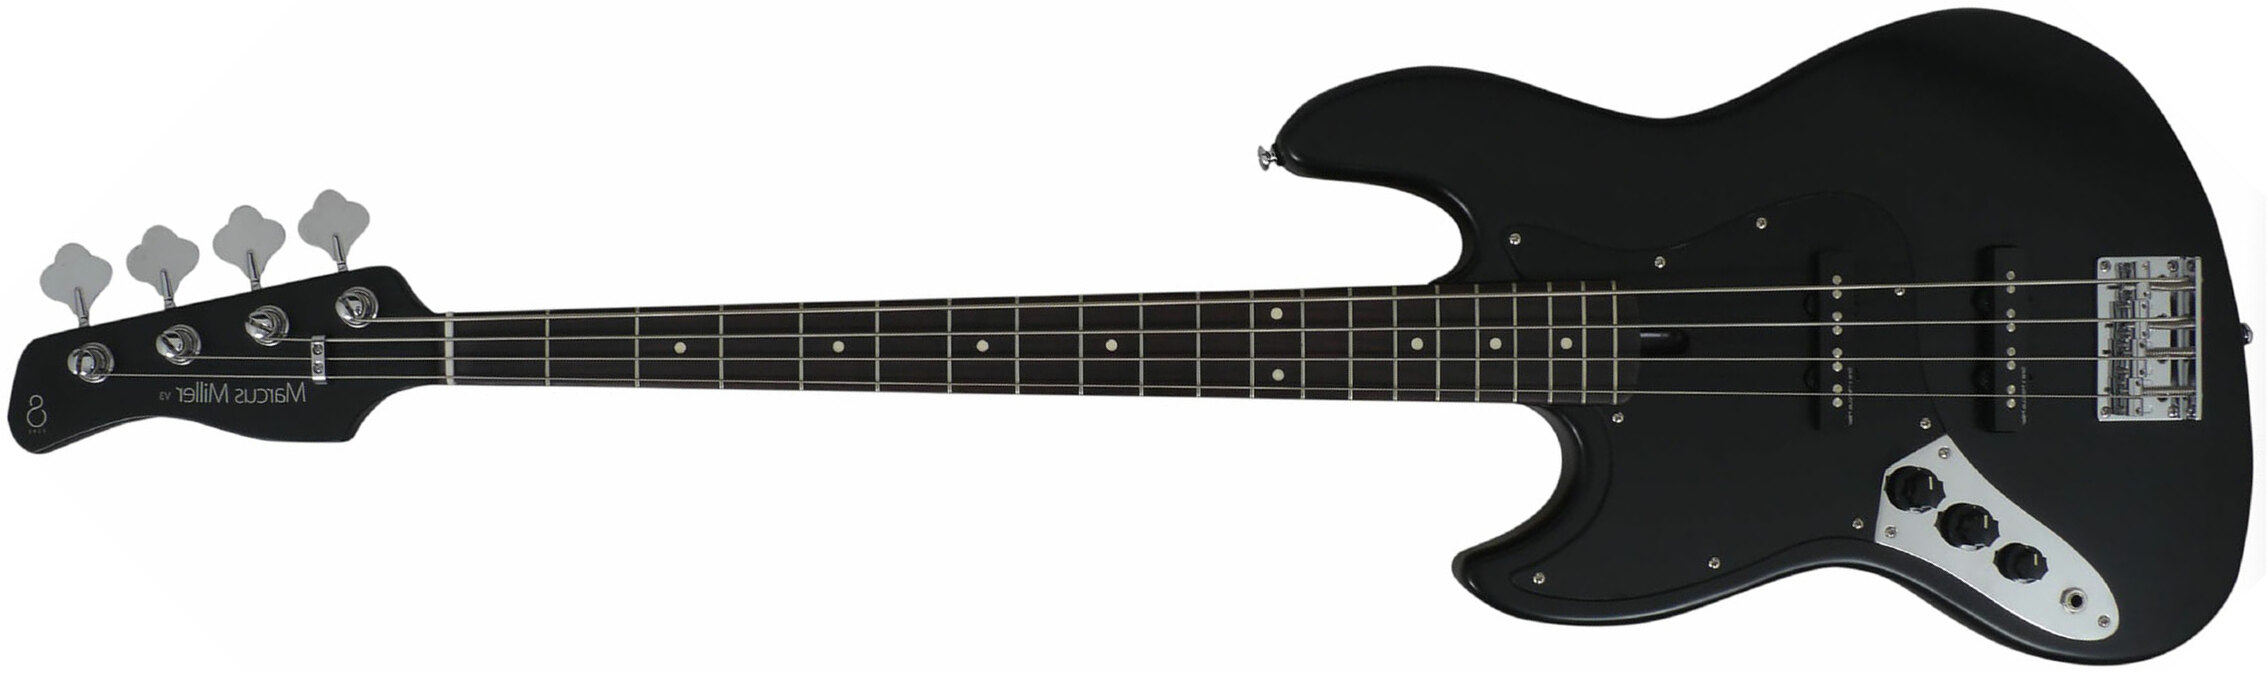 Marcus Miller V3p 4st Lh Gaucher Rw - Black Satin - Solid body electric bass - Main picture